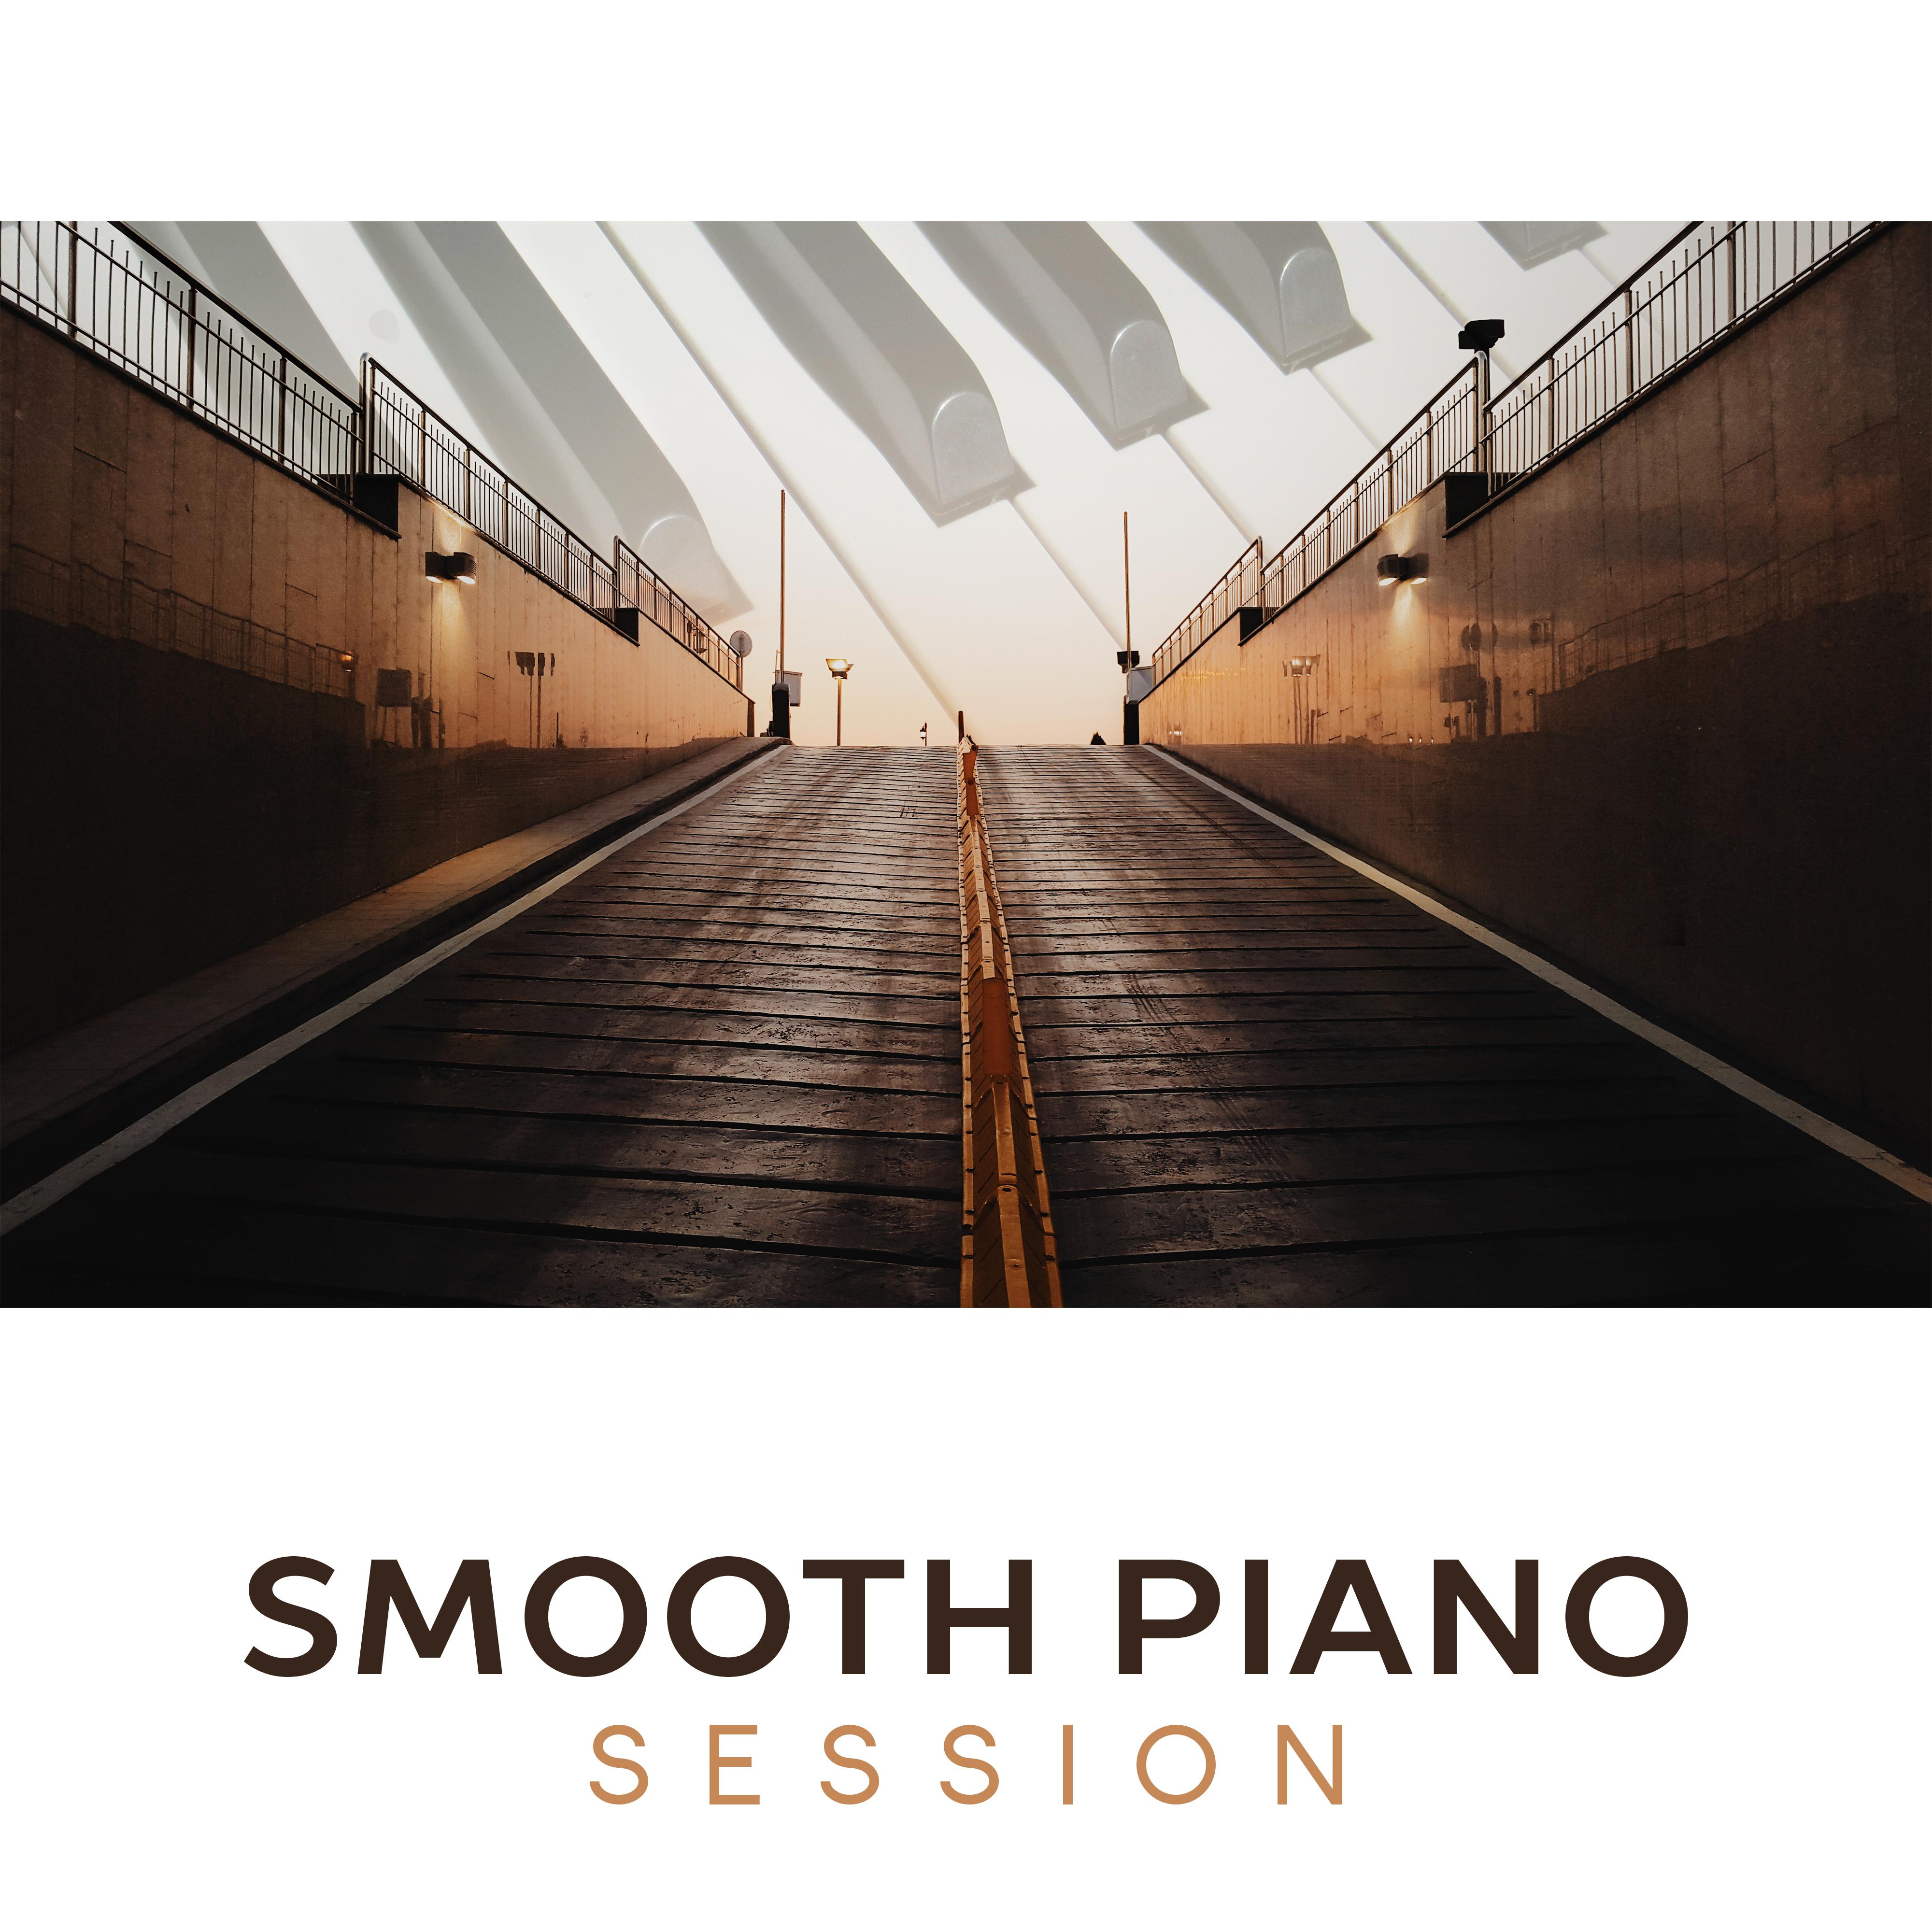 Smooth Piano Session